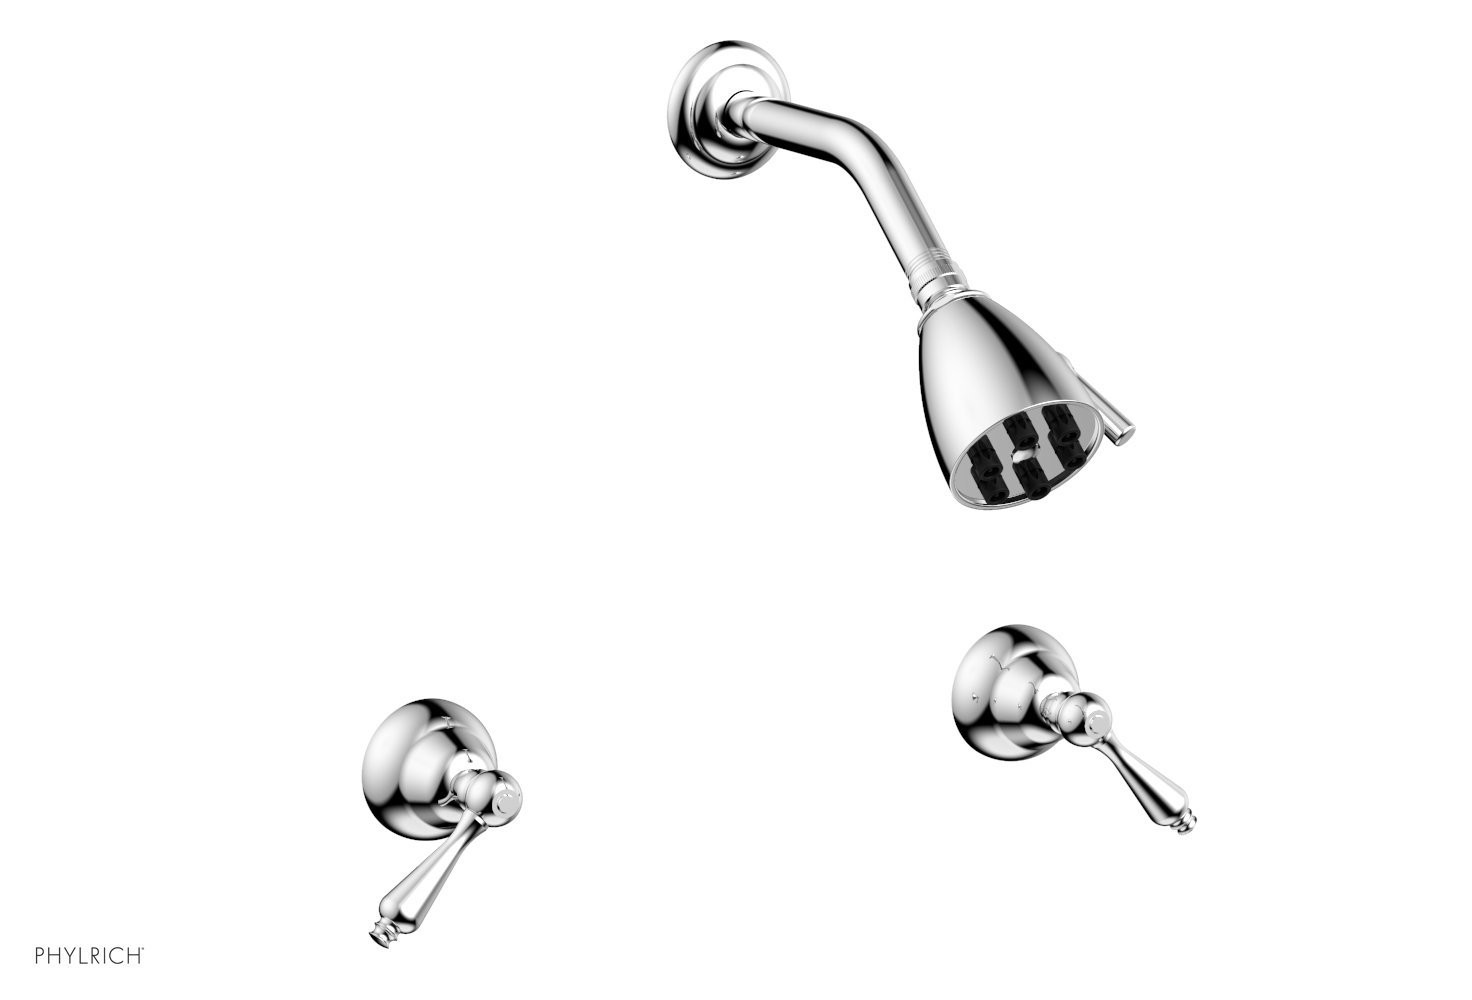 PHYLRICH D3100 REVERE & SAVANNAH WALL MOUNT SHOWER SET WITH TWO STRAIGHT LEVER HANDLES